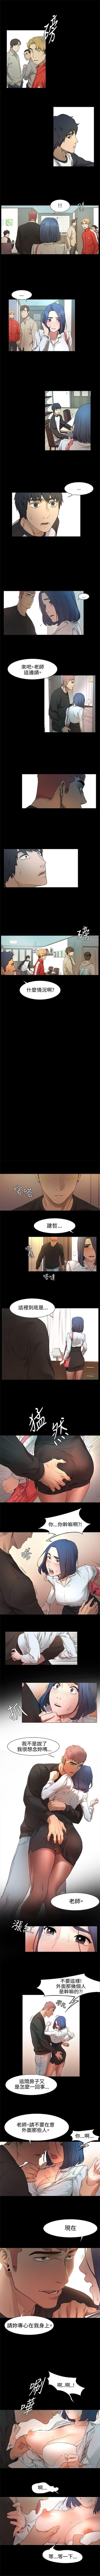 Fuck For Cash 衝突 1-106 官方中文（連載中） Hard Fucking - Page 11